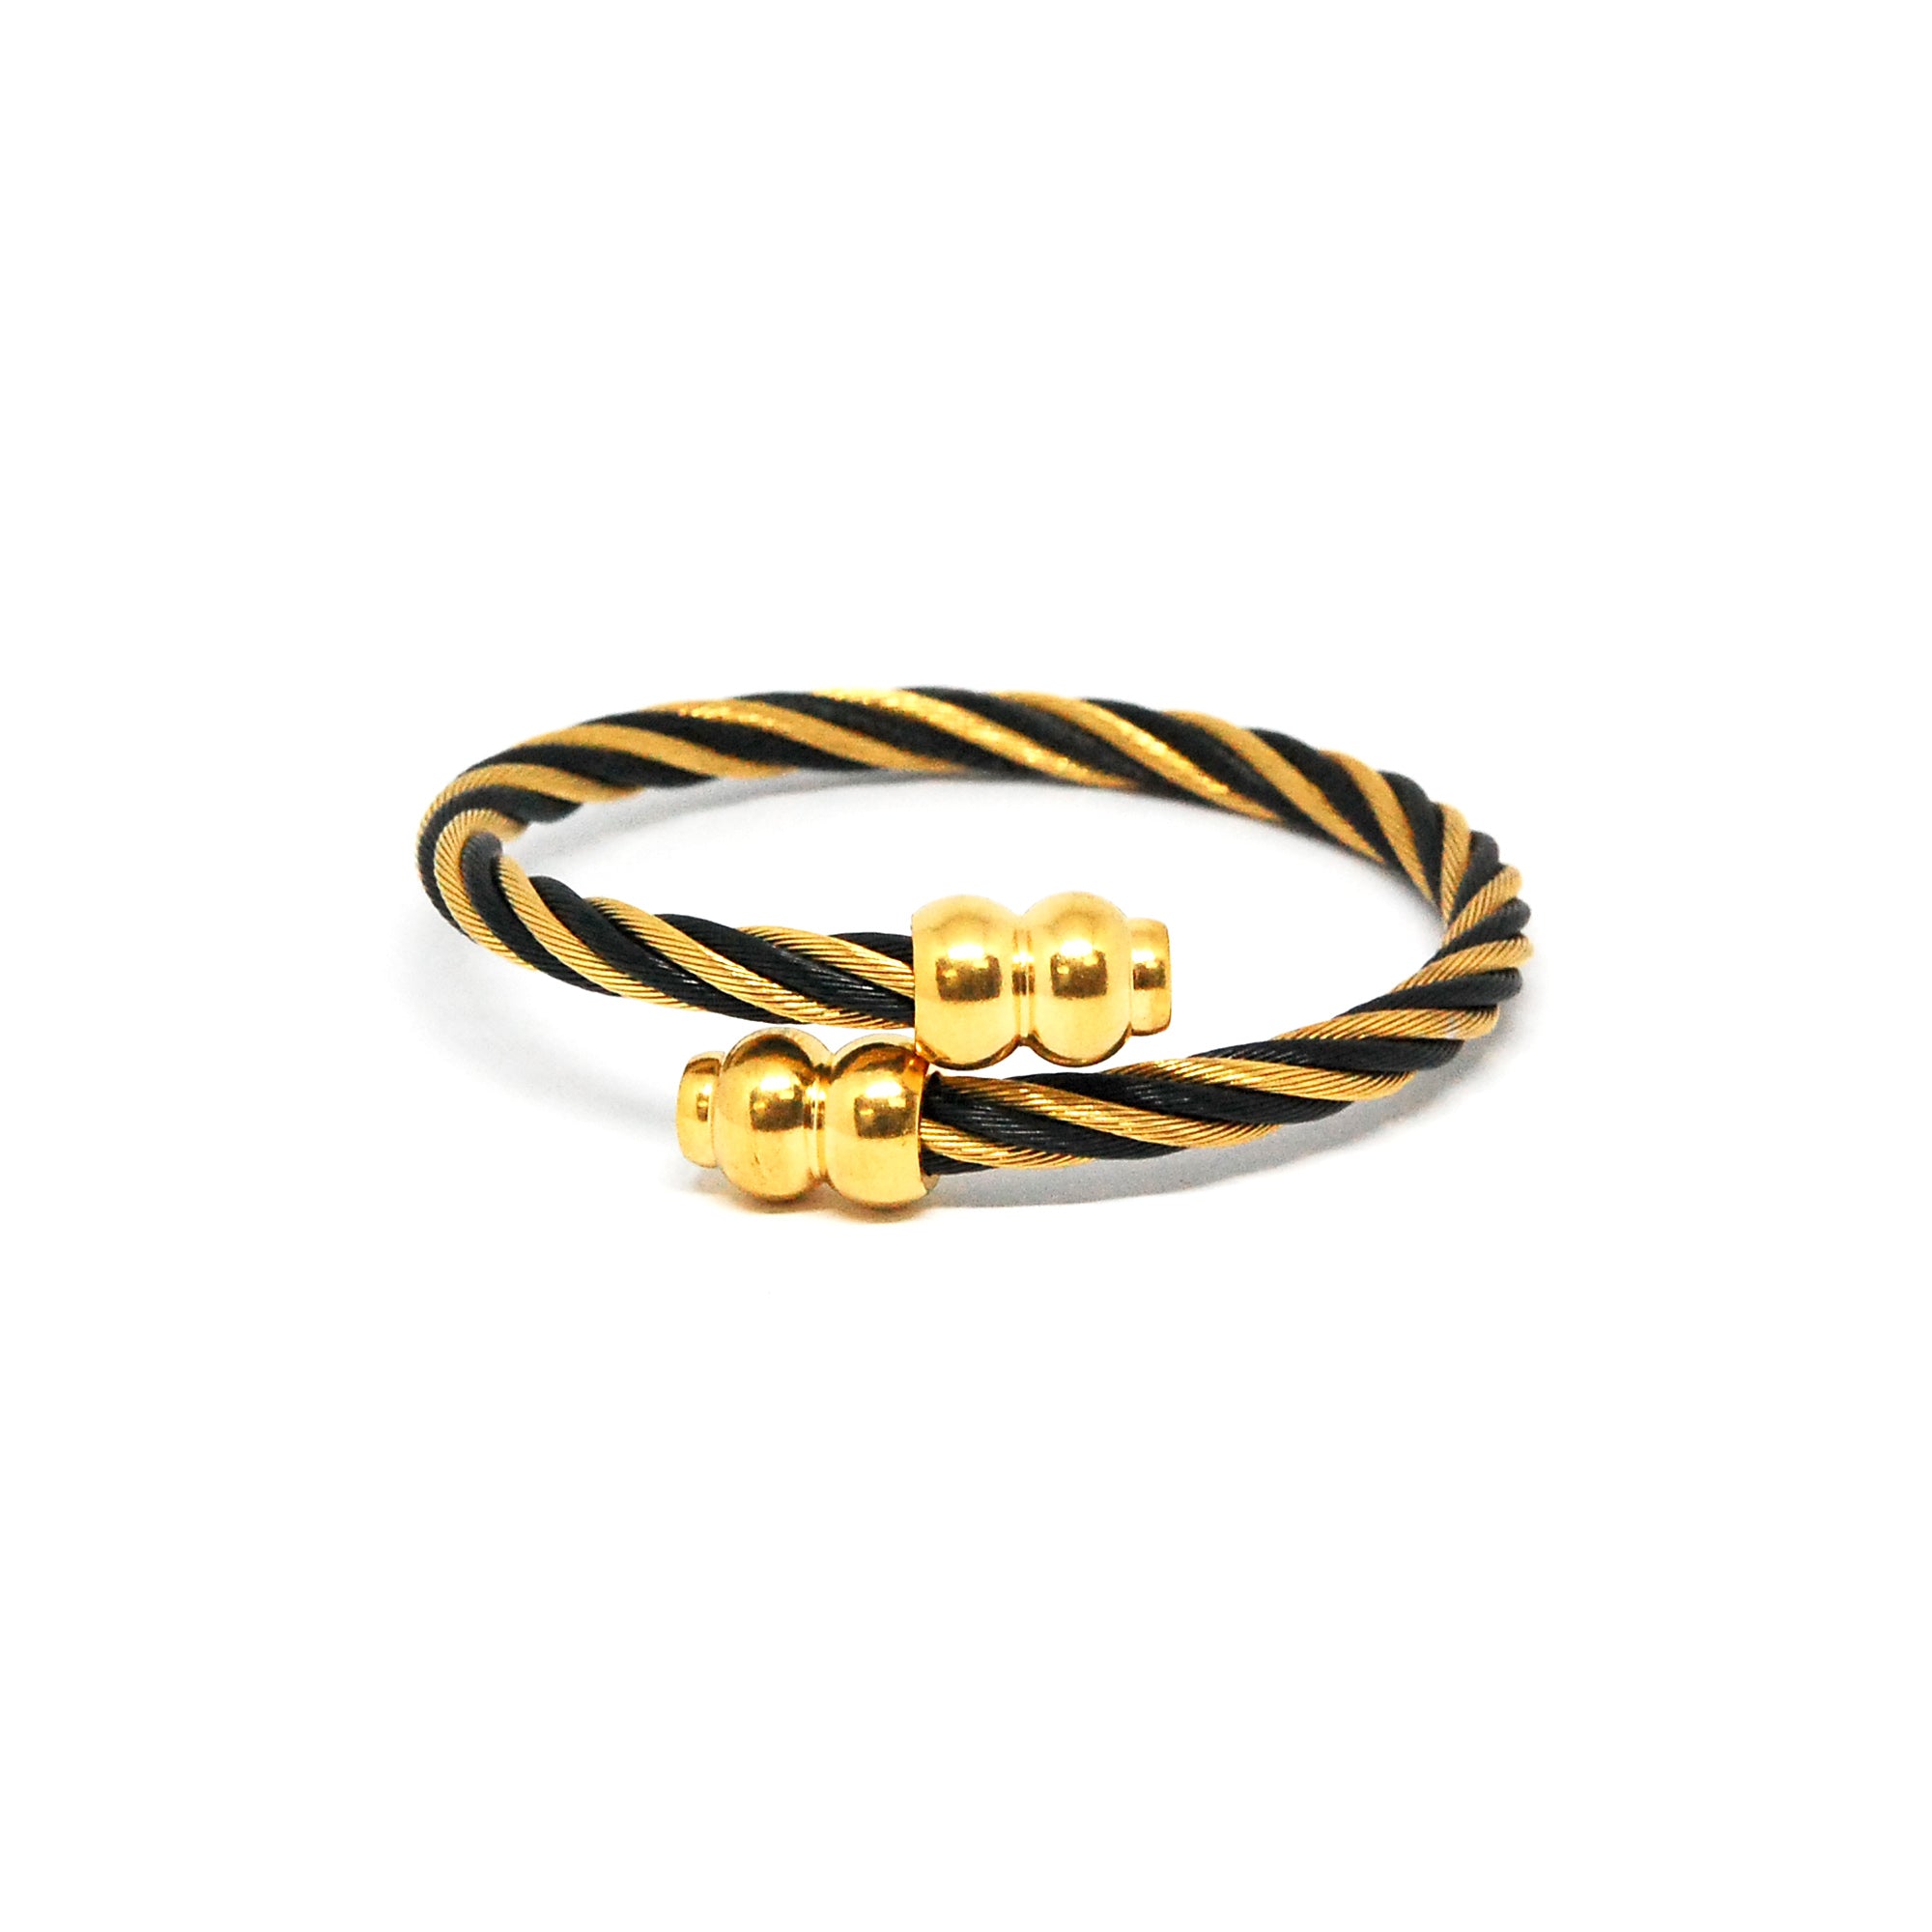 ESBG 6719: 2-Tone Twisted Bangle w/ Gold-Plated Celtic Torc Ends (Black & Yellow Gold)